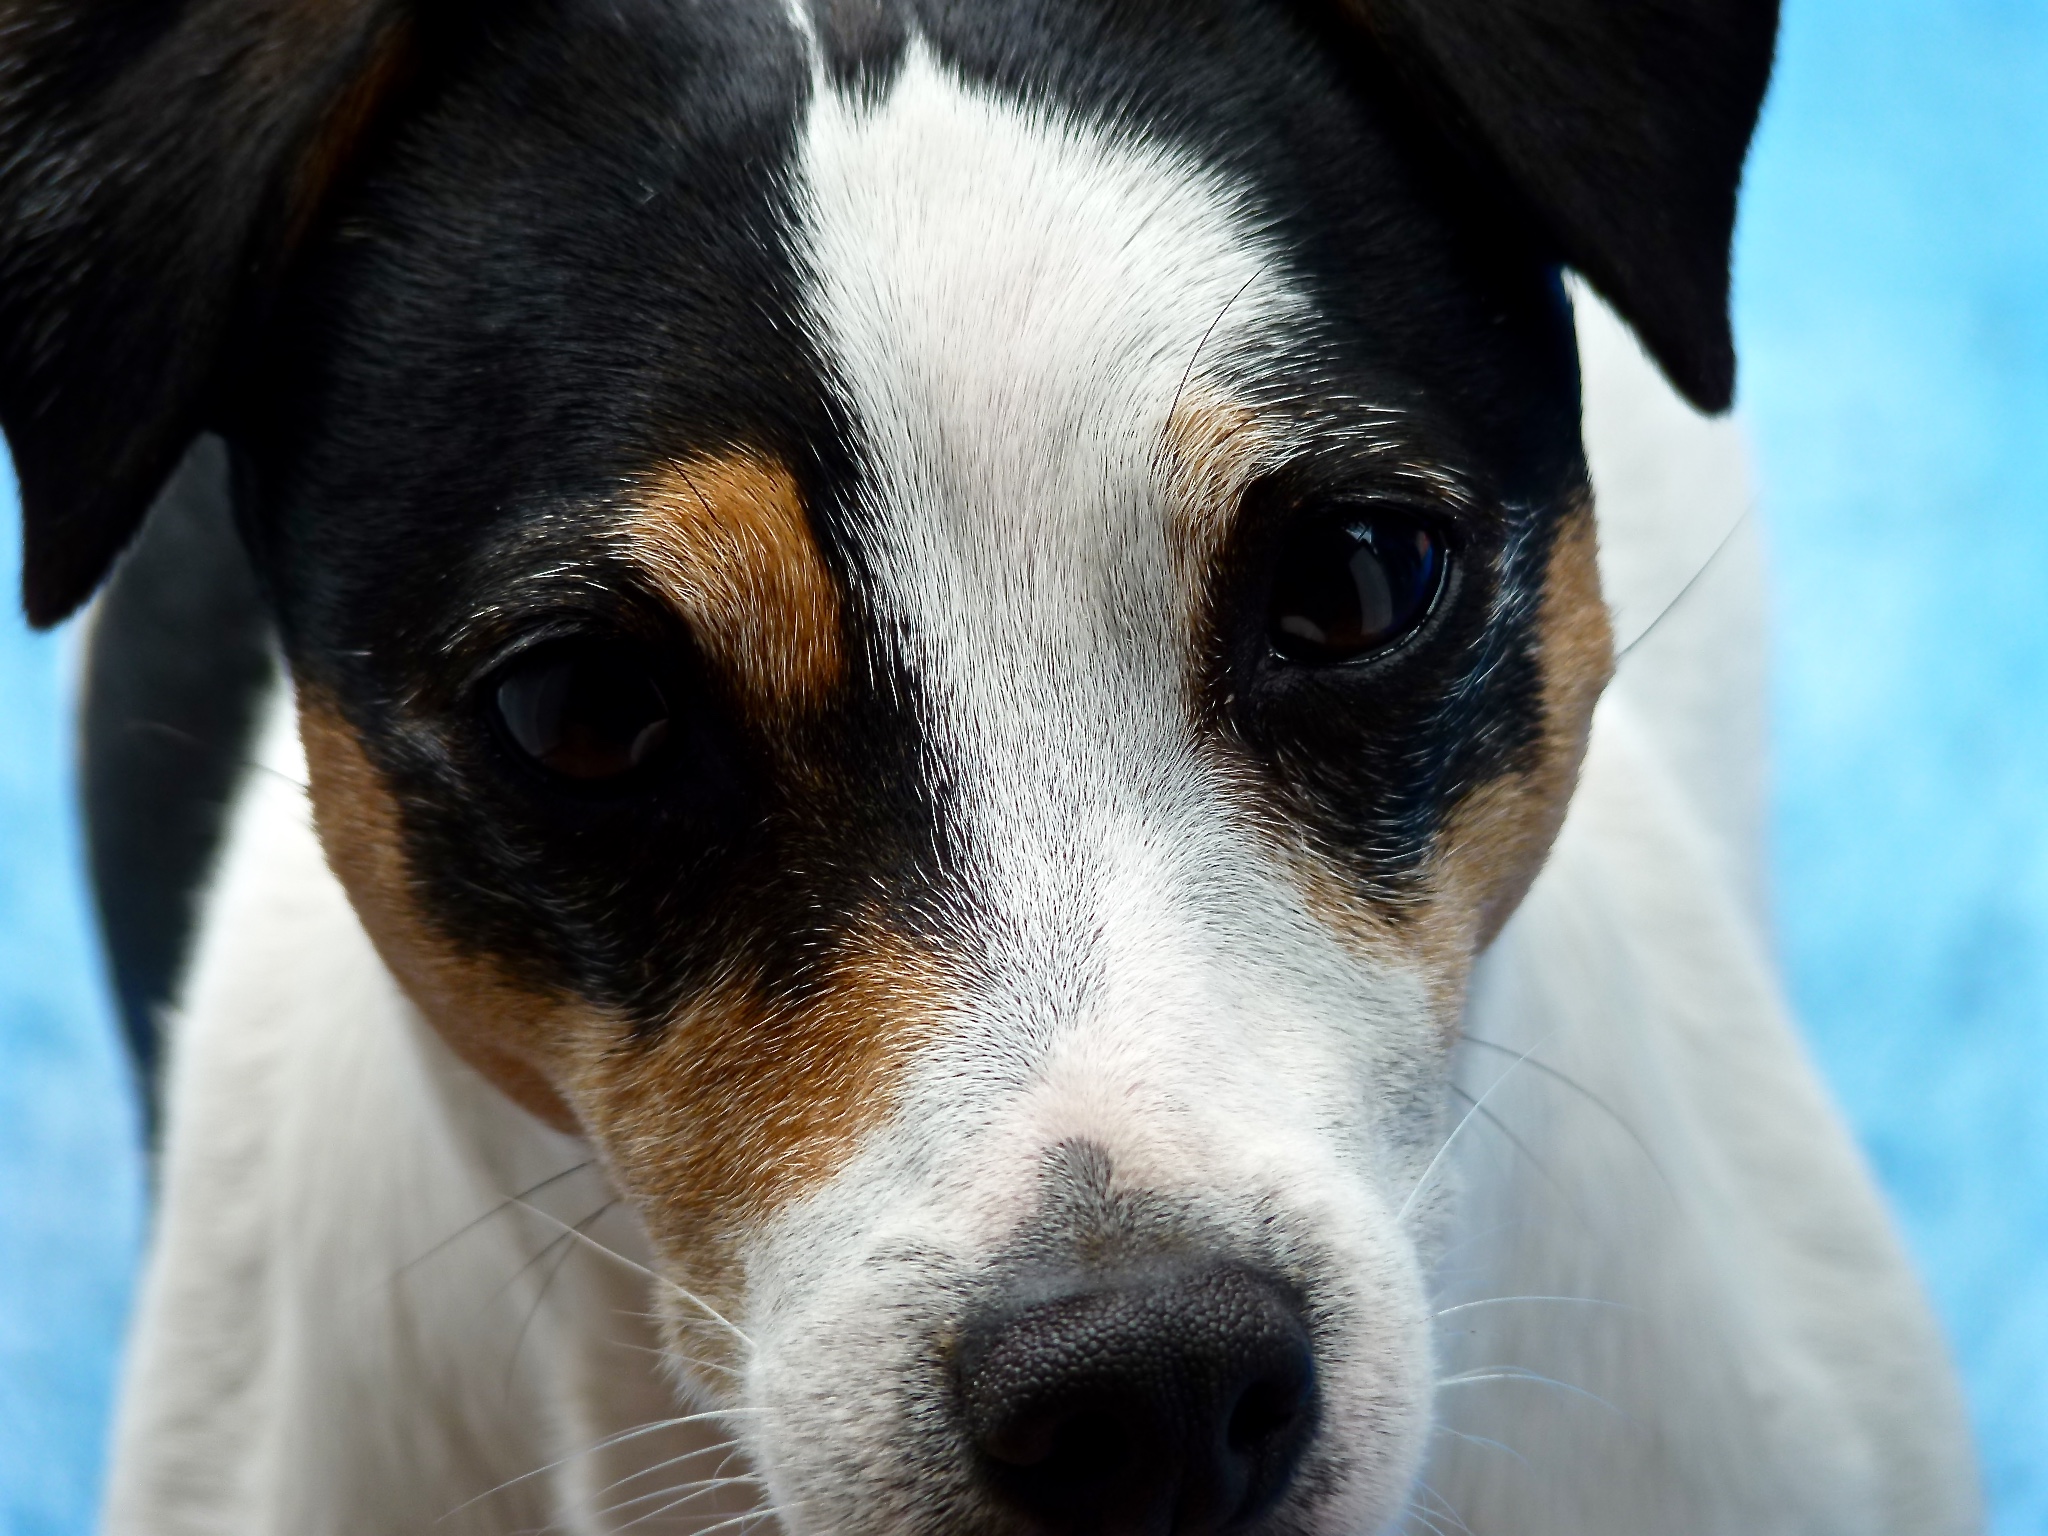  I am a Jack Russell Terrier. Or at least I think I am. I don't have a birth certificate and no one knows my parents. Humans call me a "rescue dog" because I was rescued from a place where I was very unhappy. But don't worry, things have turned out g